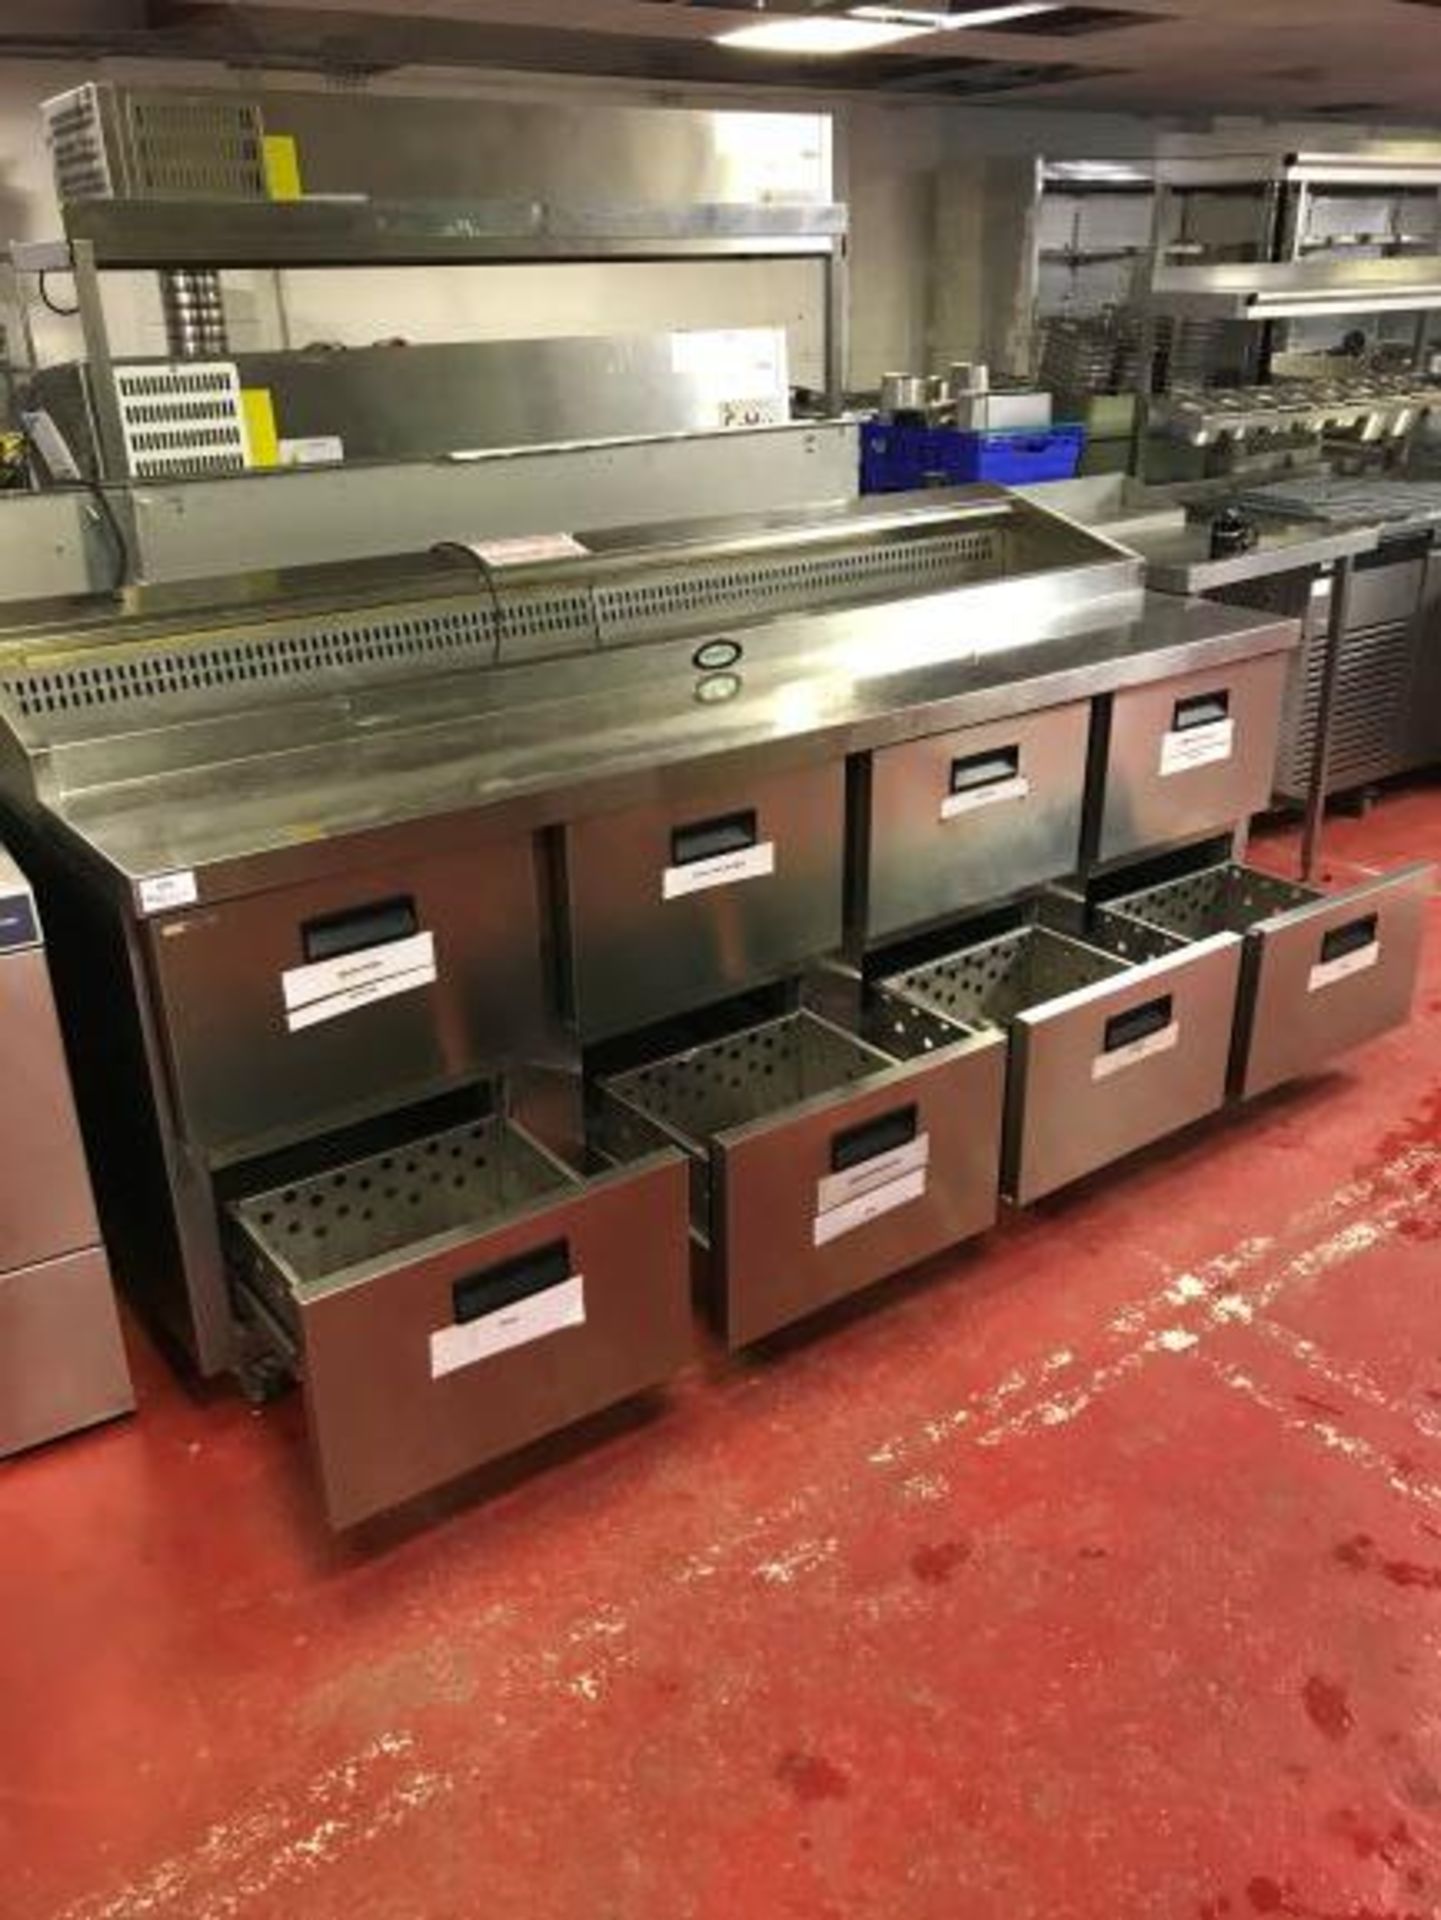 Foster Refrigeration FPS4HR stainless steel refrigerated preparation counter - Image 3 of 4